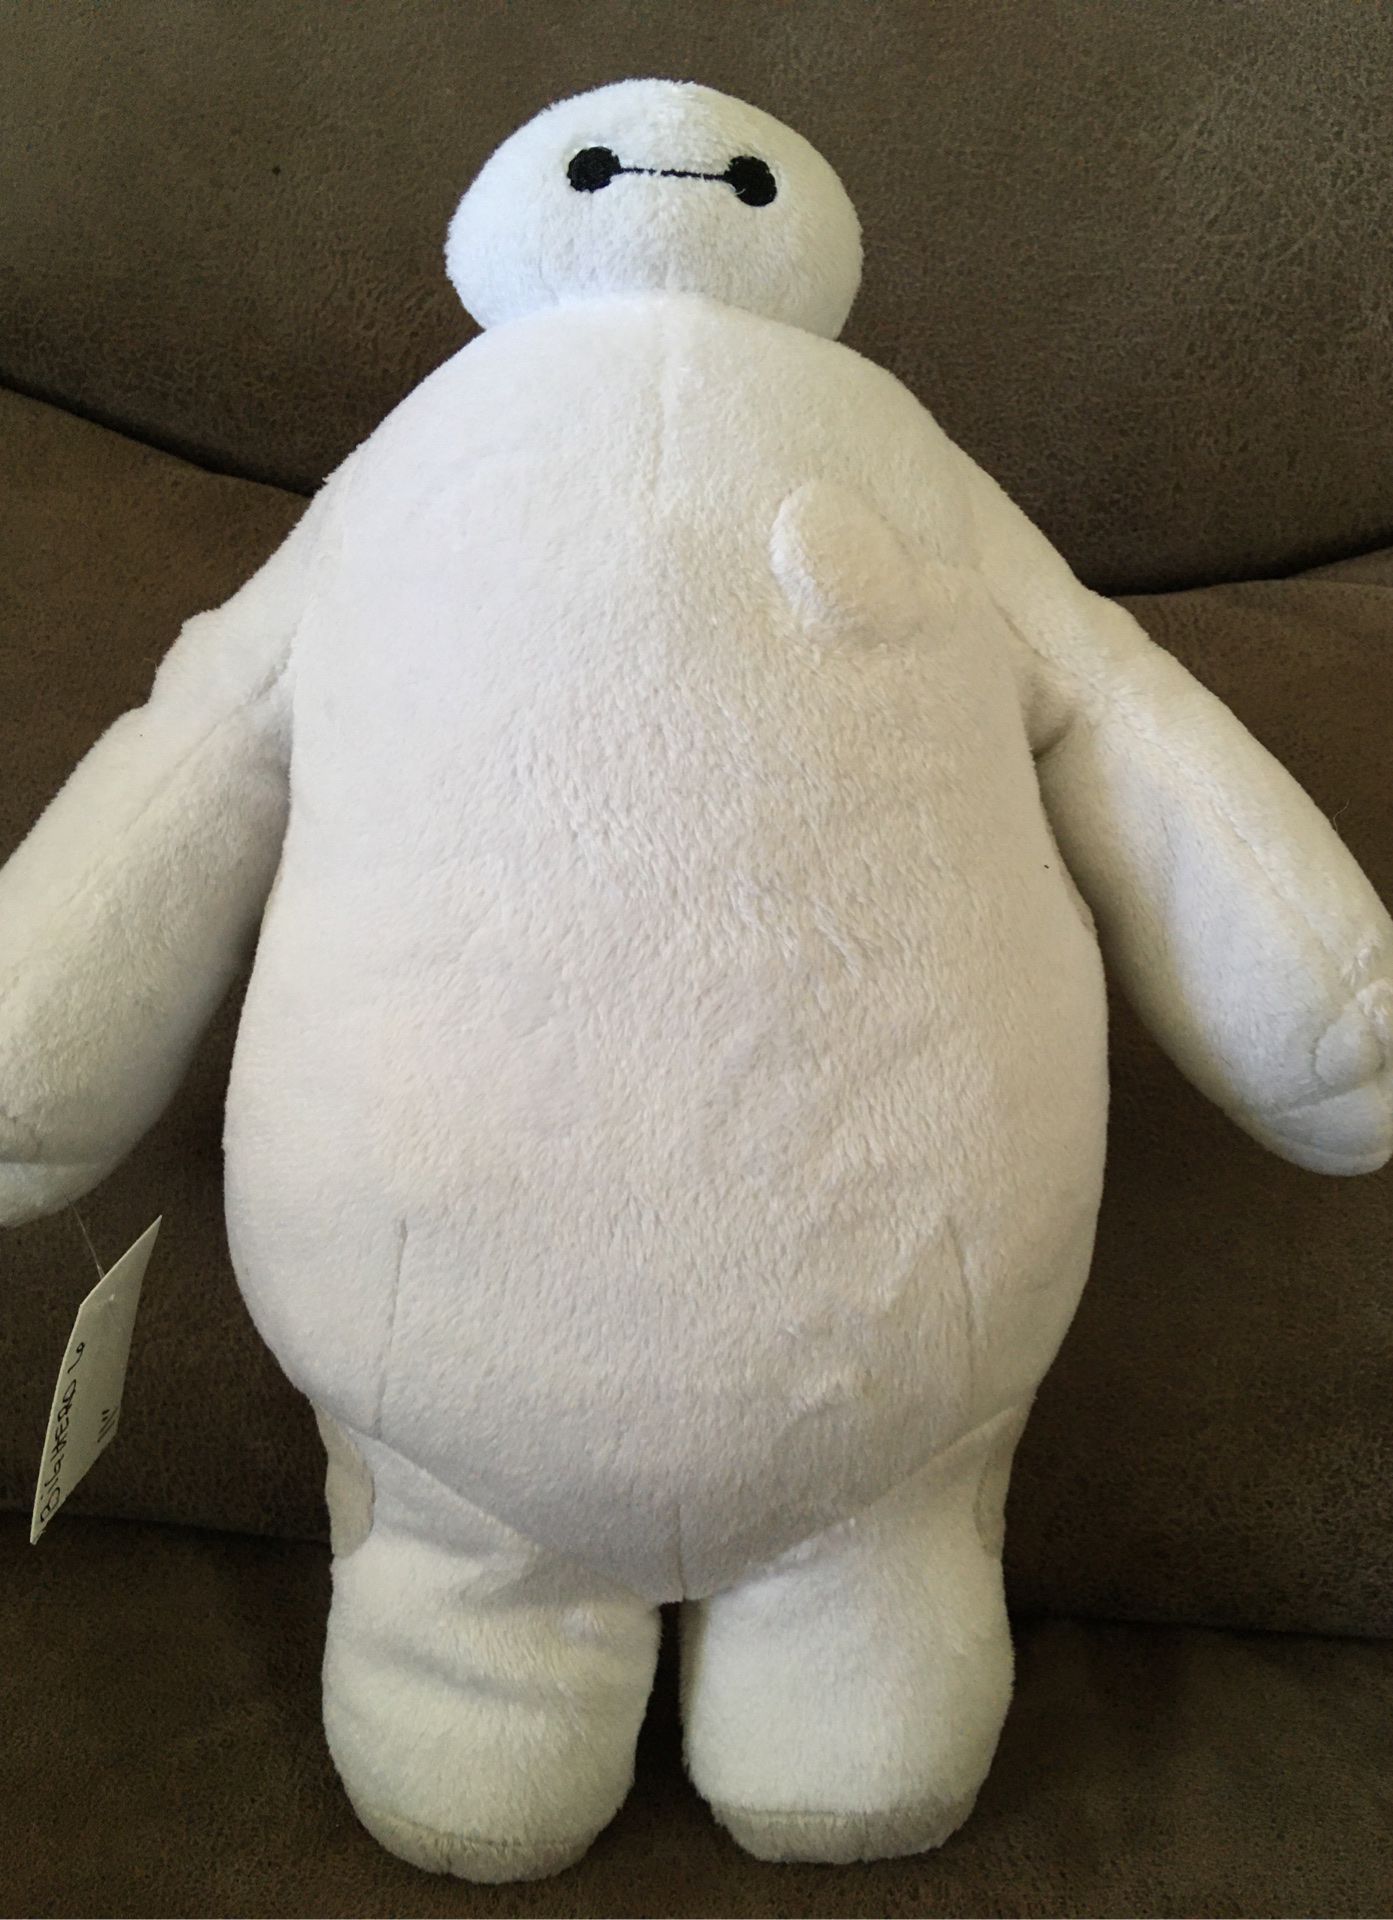 11 inch big hero six stuffed animal/talks $8. Batteries are not included